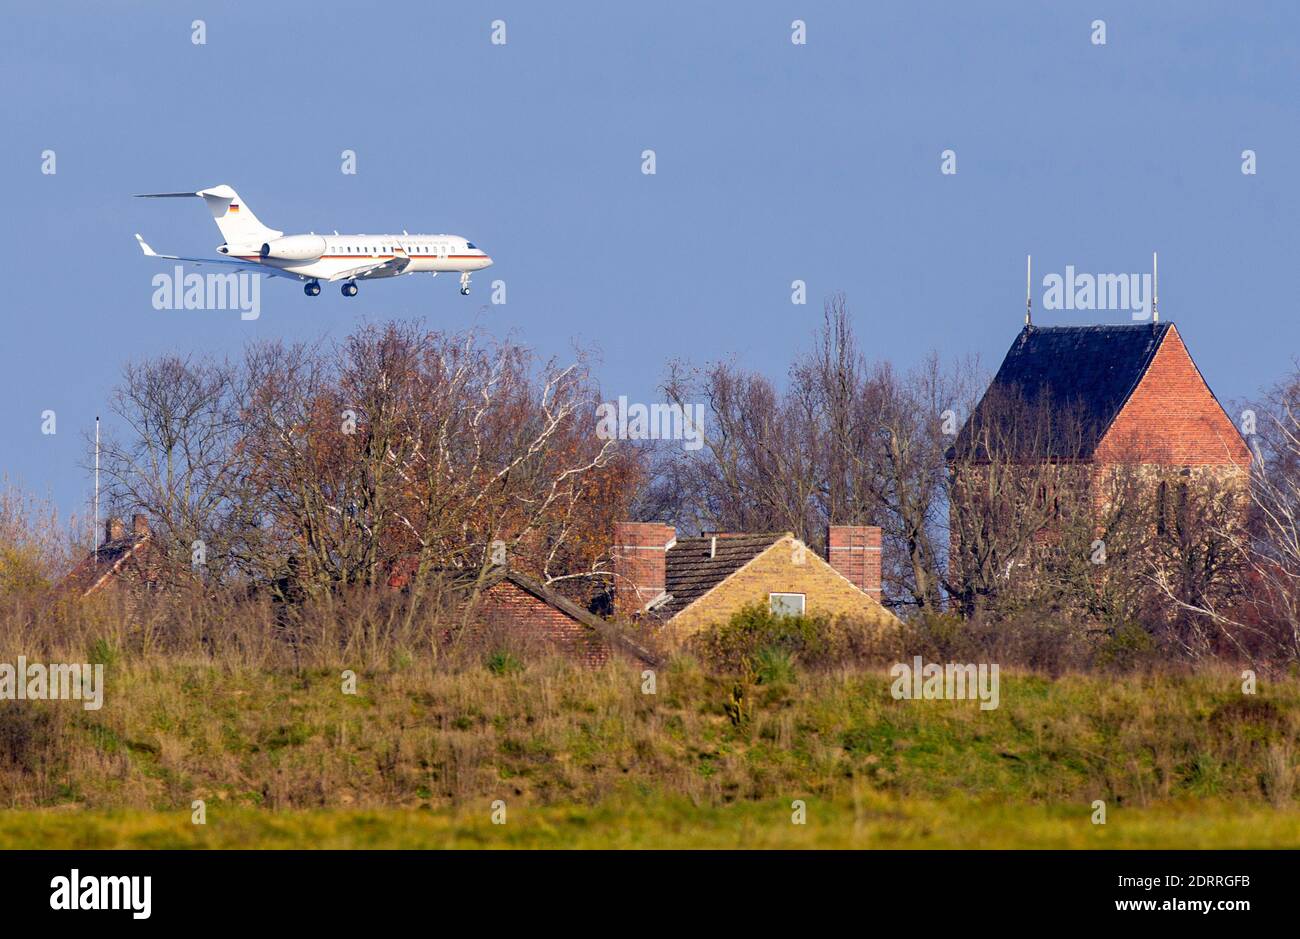 14 December 2020, Brandenburg, Schönefeld/Ot Selchow: A twin-engine Bombardier BD-700-1A10 Global 6000 with the registration 14-07 and the inscription 'Federal Republic of Germany' is approaching BER above the houses of the village. Photo: Soeren Stache/dpa-Zentralbild/ZB Stock Photo